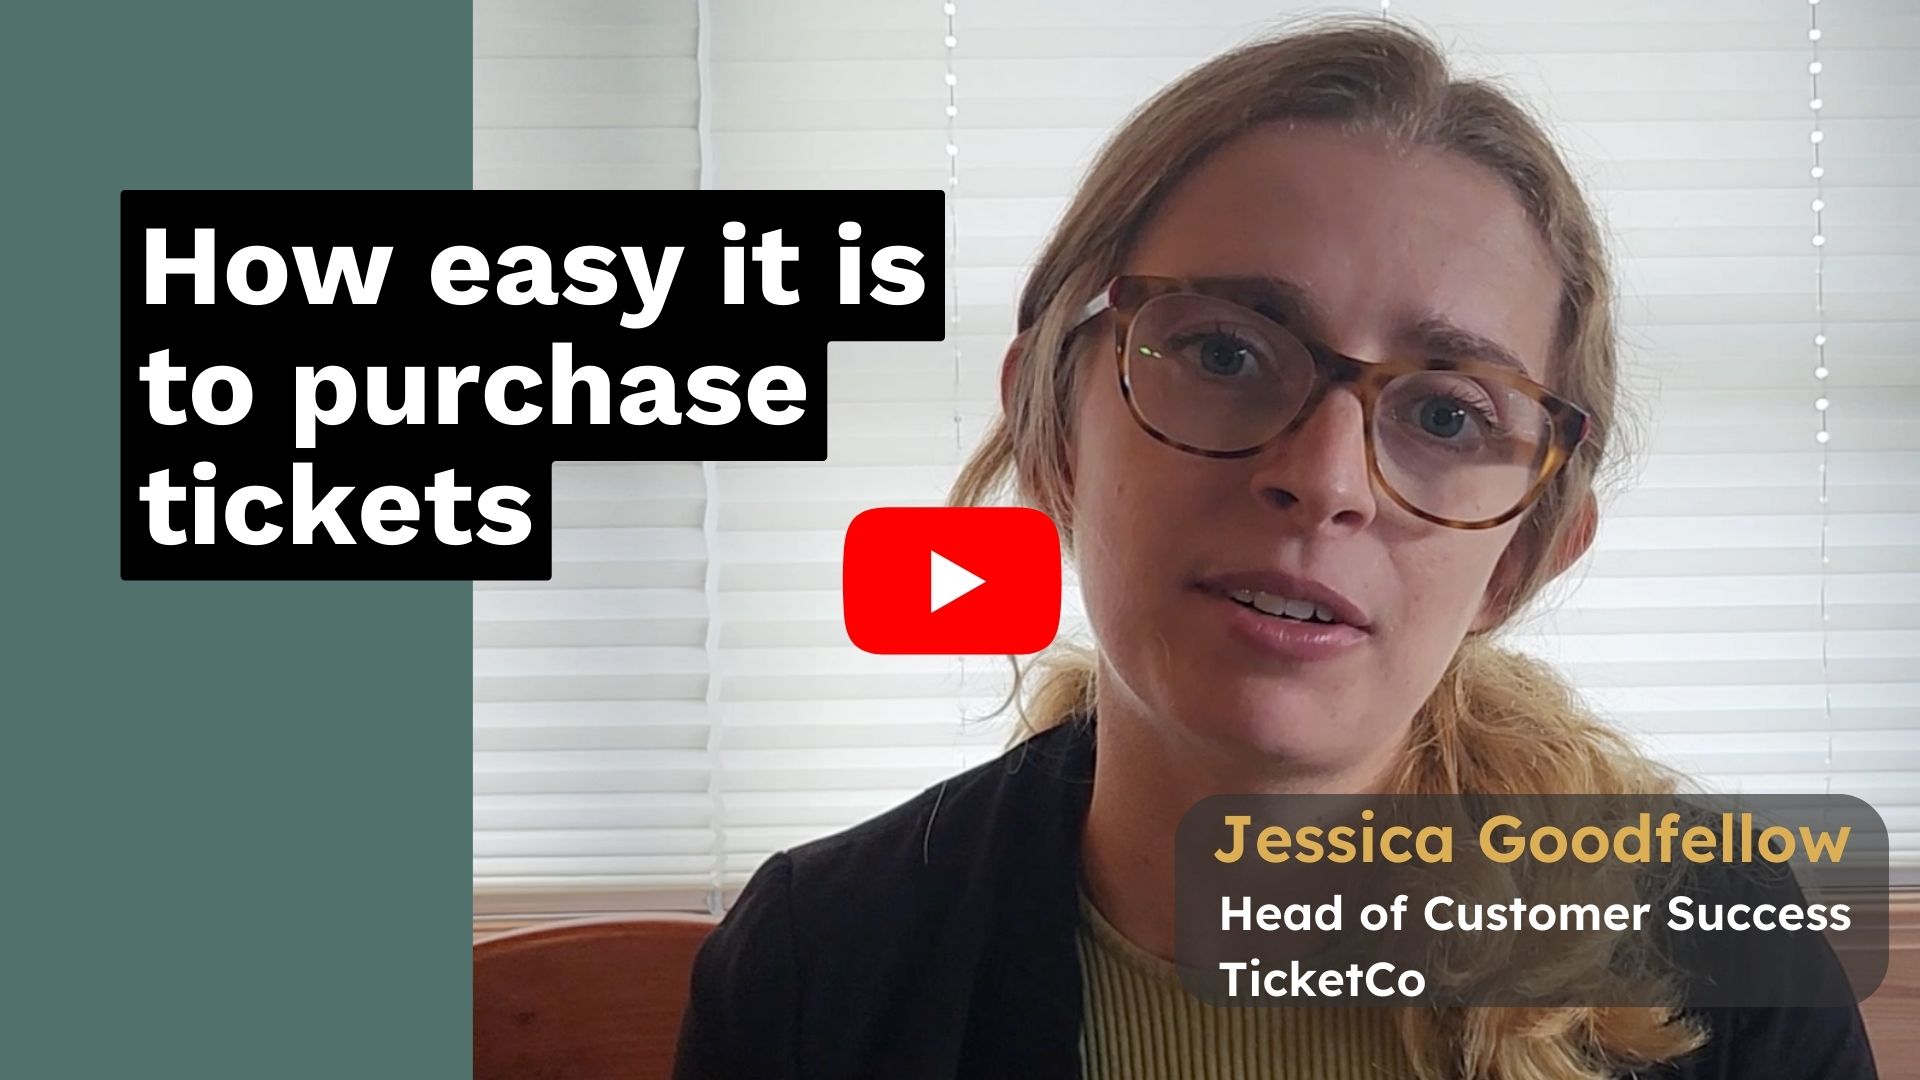 How easy it is to purchase tickets